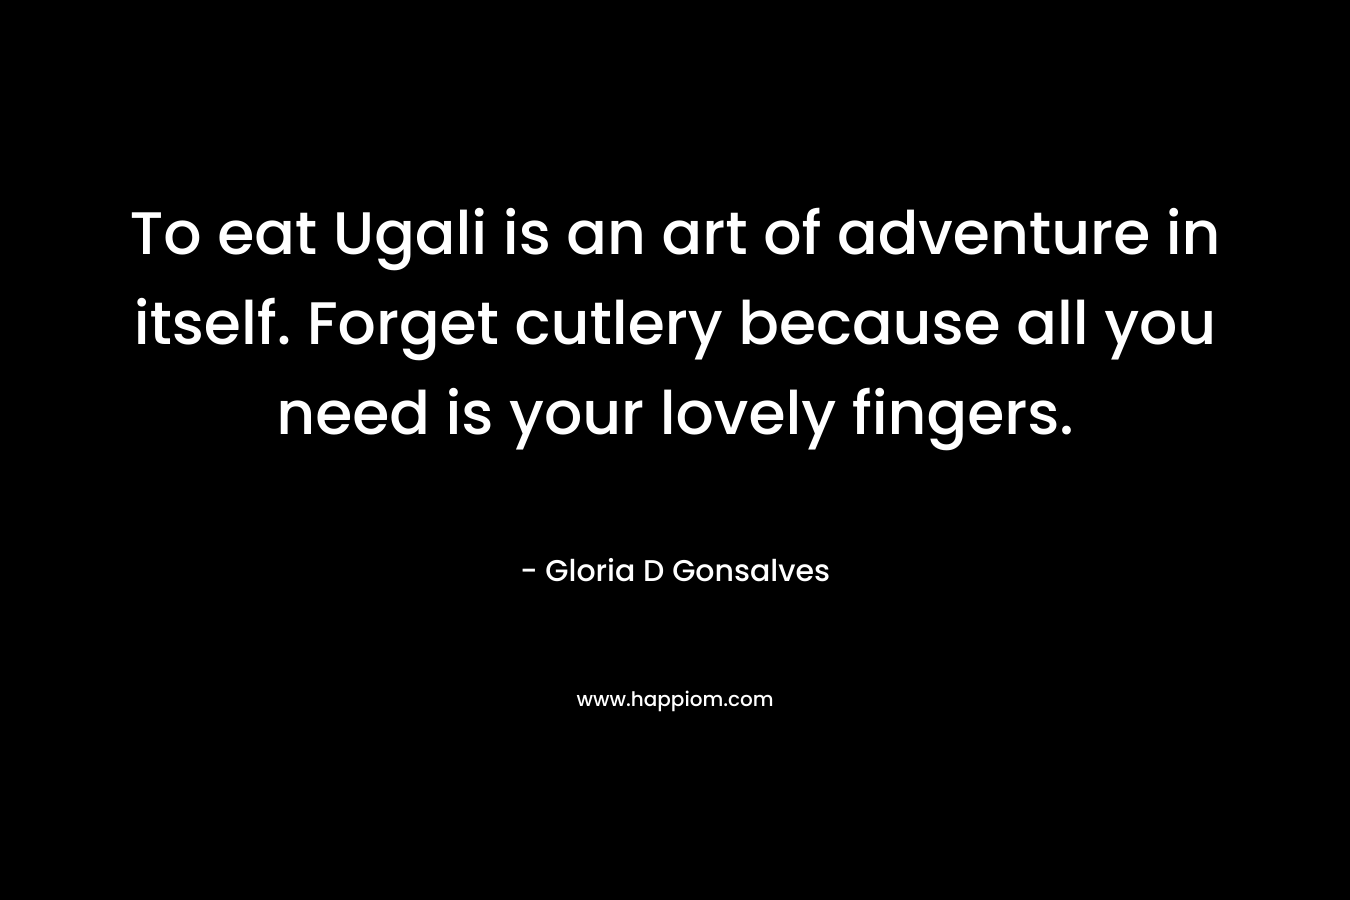 To eat Ugali is an art of adventure in itself. Forget cutlery because all you need is your lovely fingers.